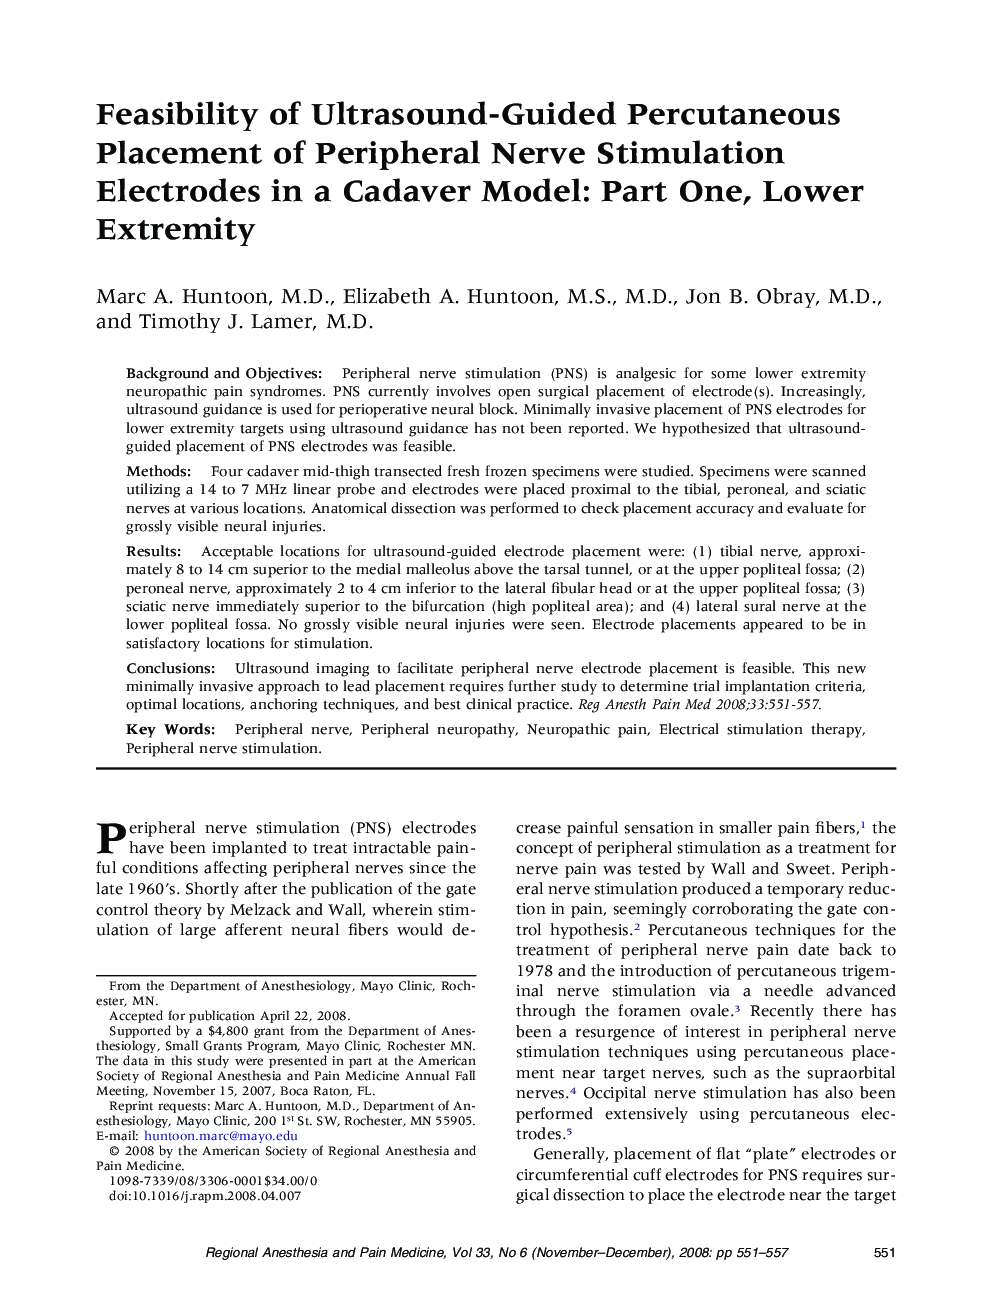 Feasibility of Ultrasound-Guided Percutaneous Placement of Peripheral Nerve Stimulation Electrodes in a Cadaver Model: Part One, Lower Extremity